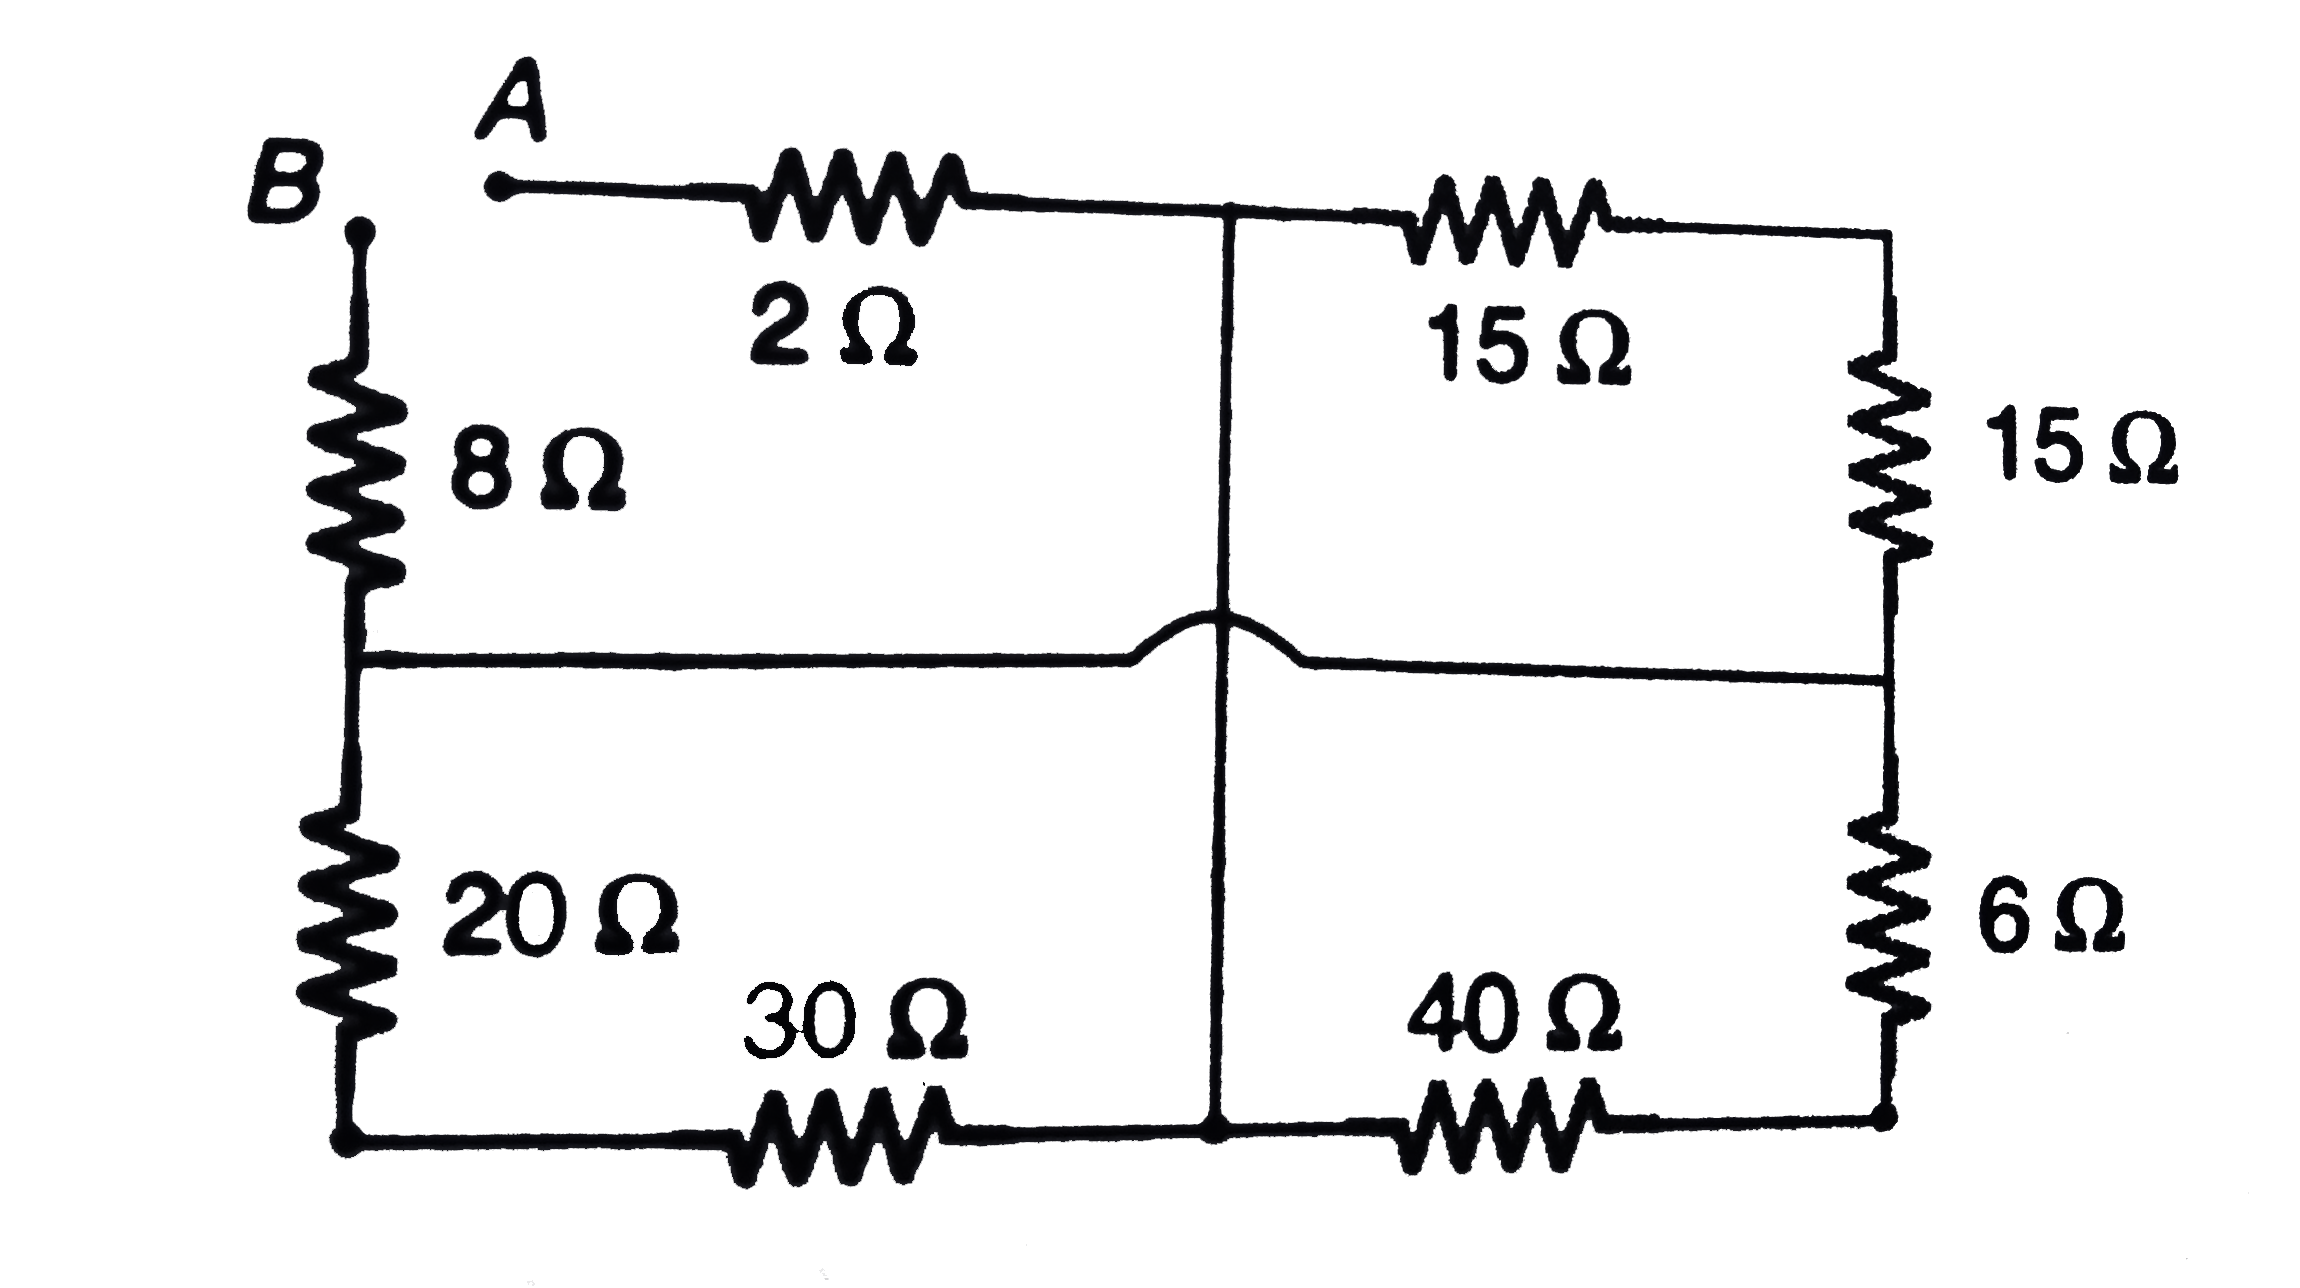 Find R(AB) in the circuit shown in figure.